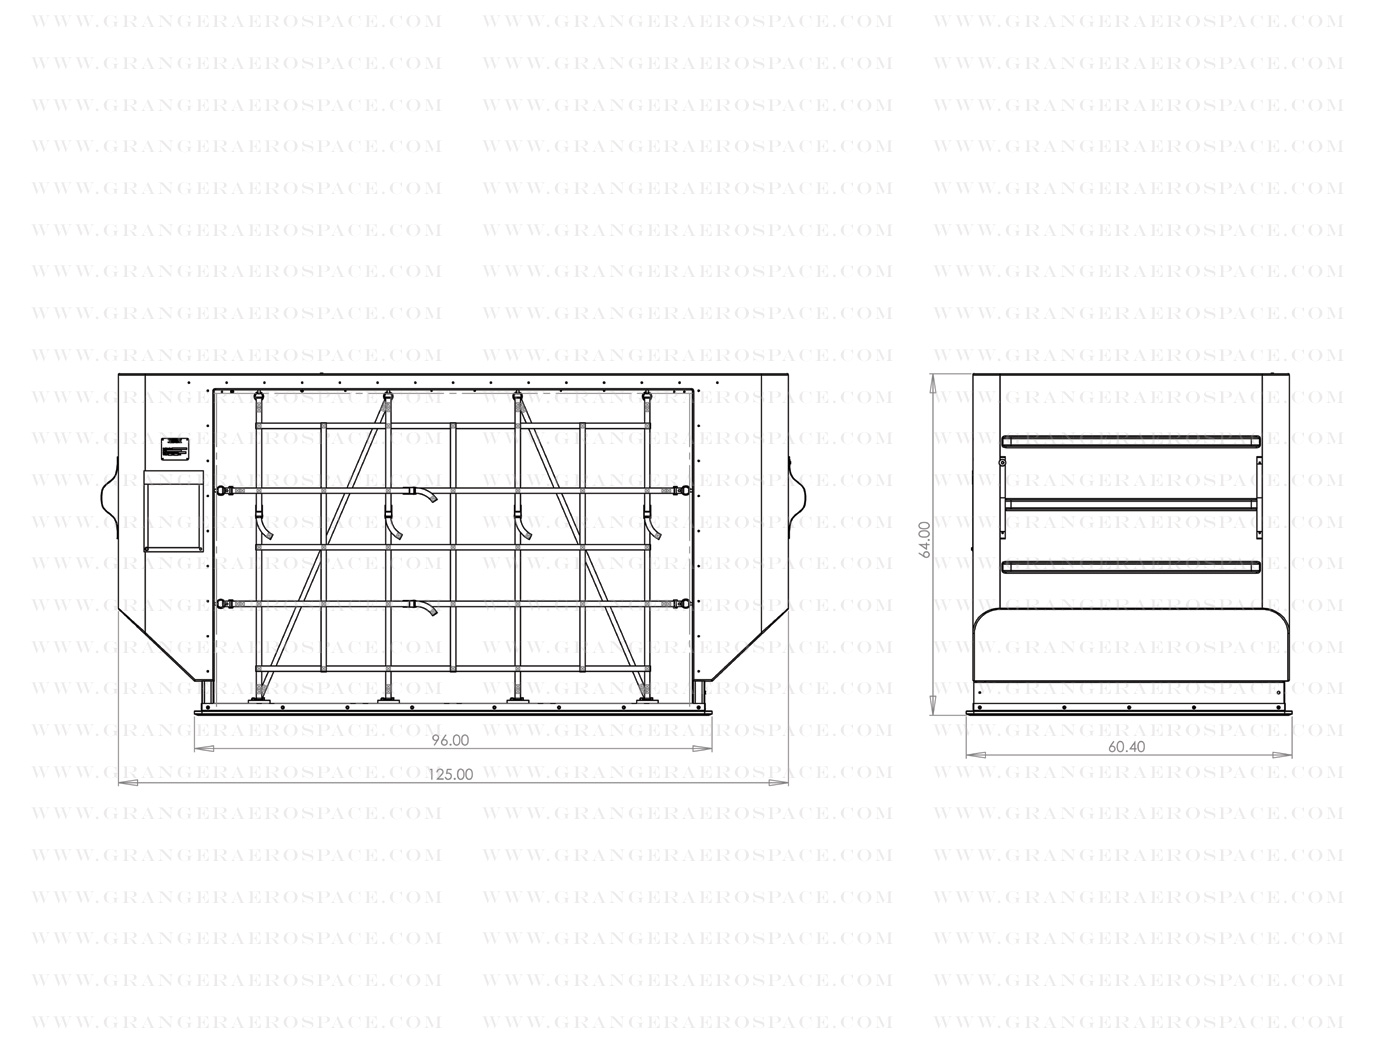 LD 8 Dimensions, LD 8 Air Cargo Container Dimensions, DQF dimensions